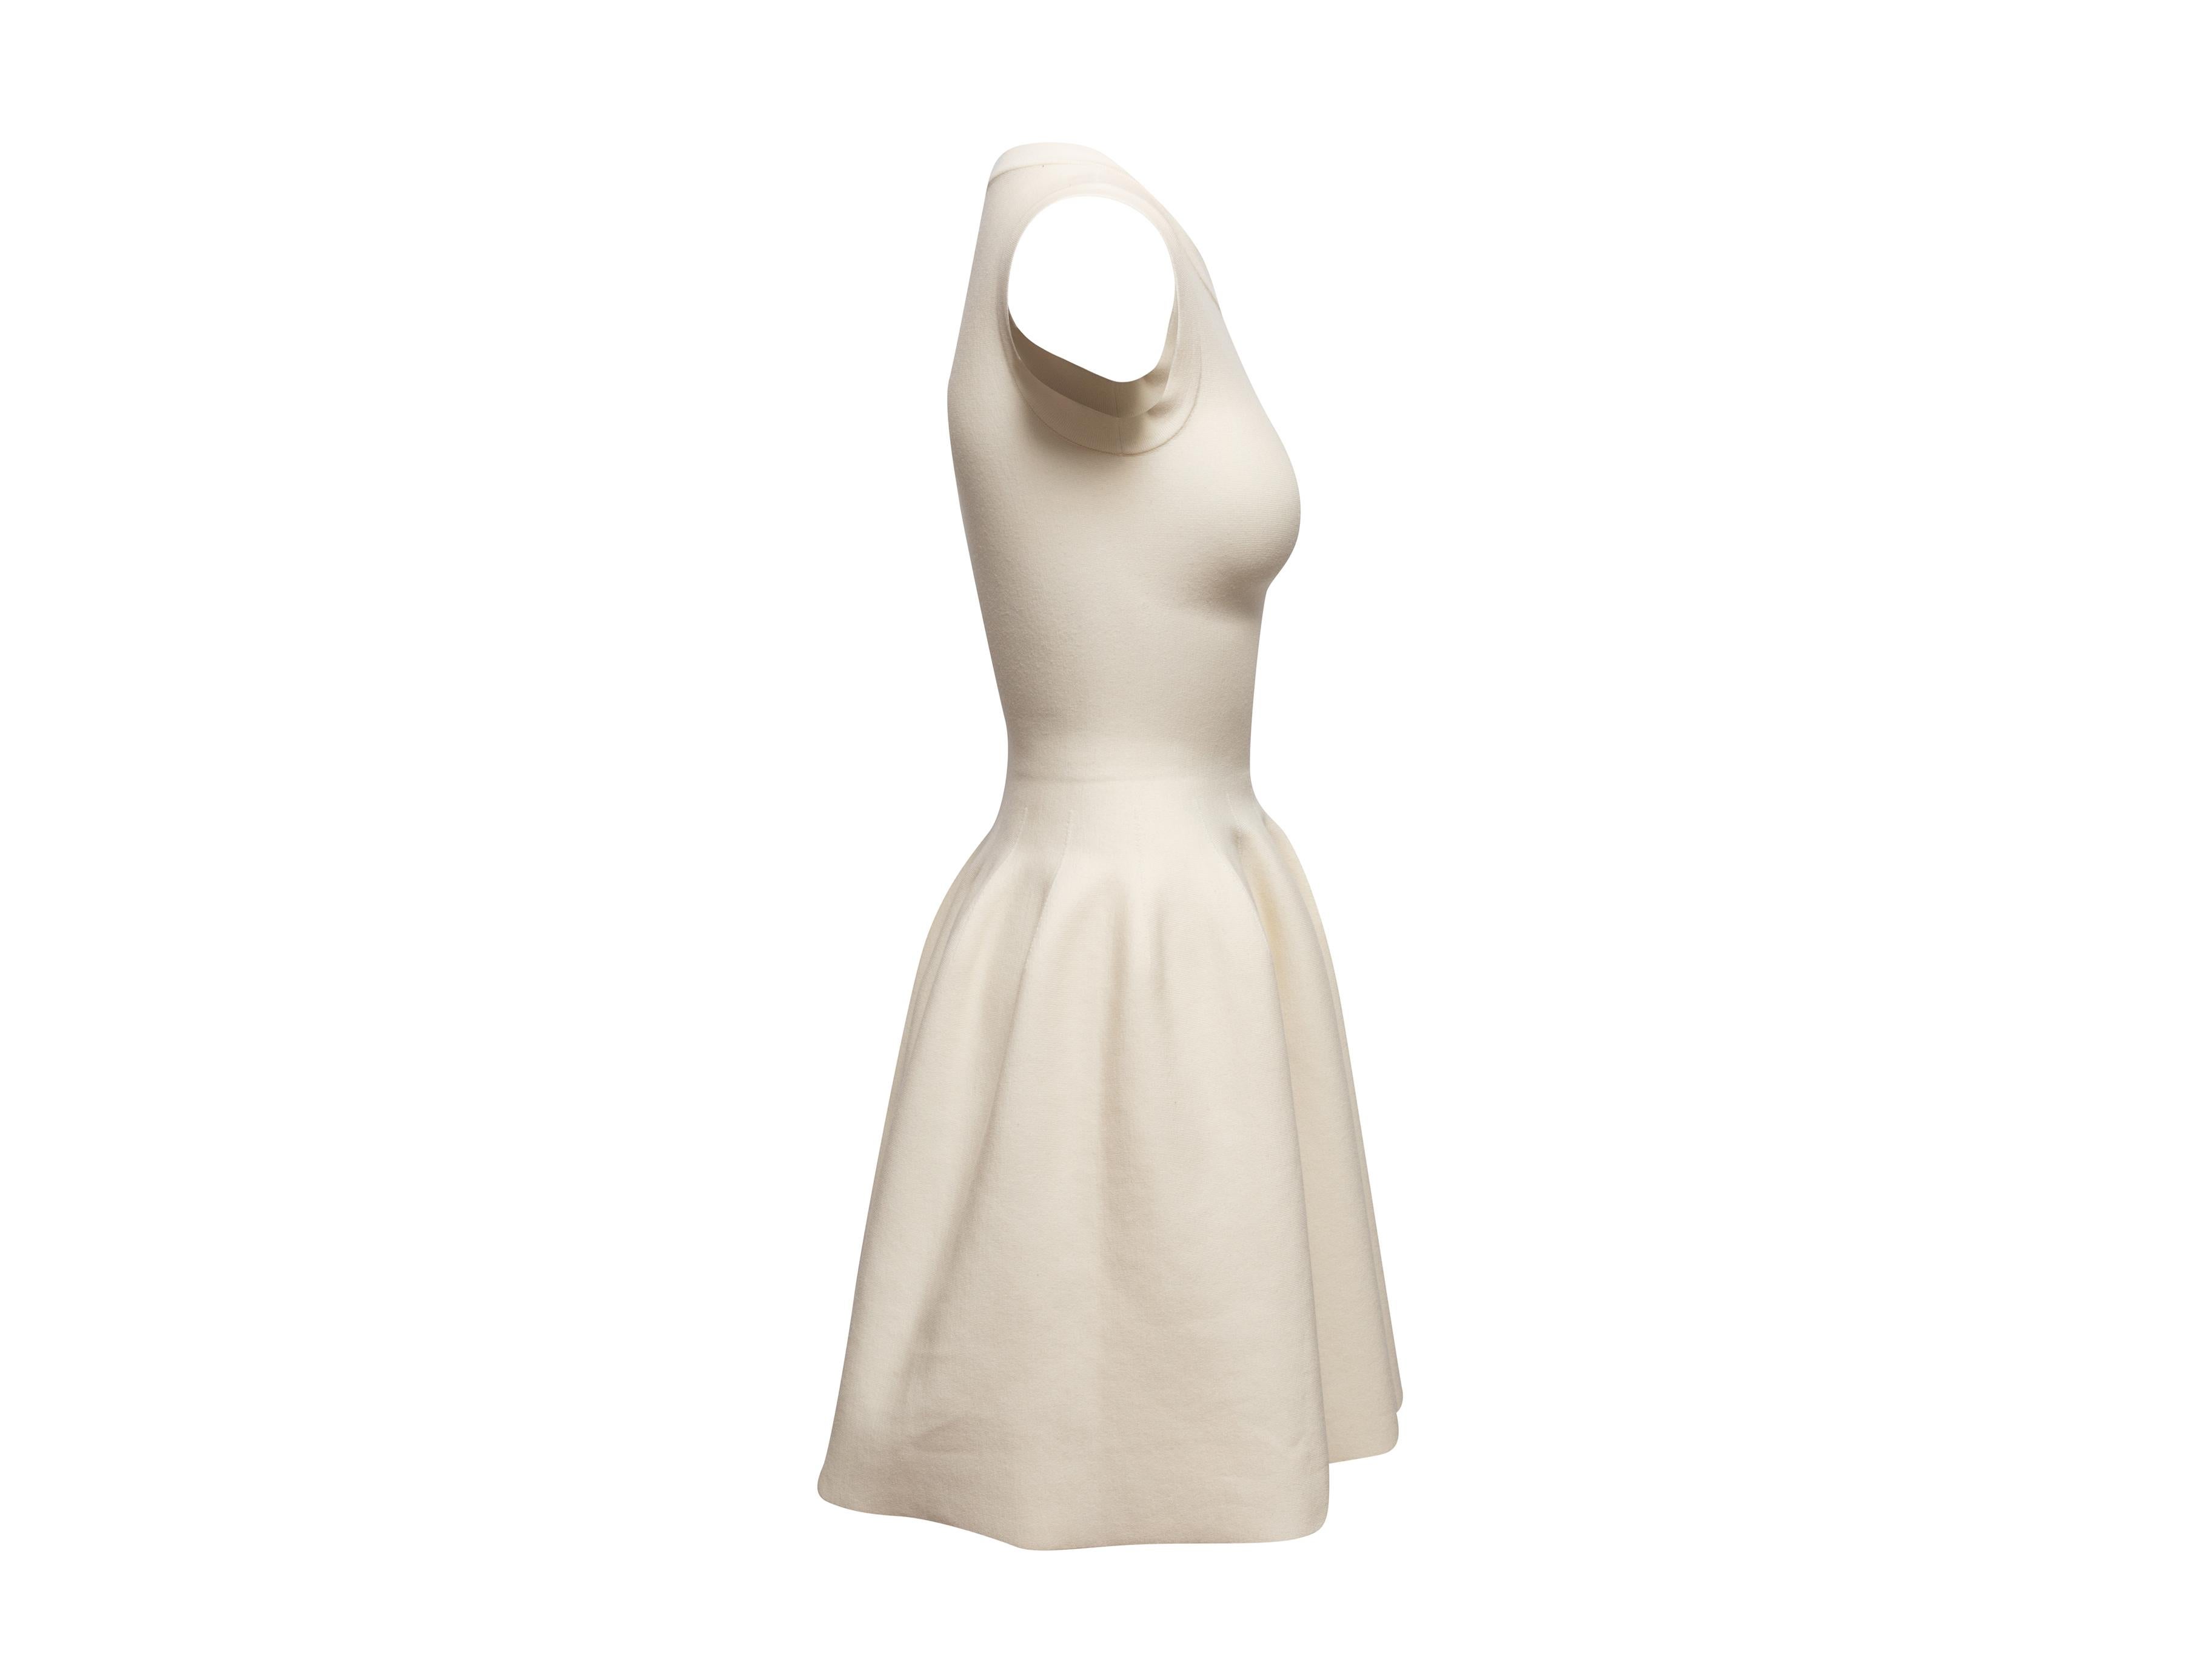 Product Details: Cream sleeveless fit and flare dress by Alaia. Crew neck. Zip closure at center back. Designer size 36. 25